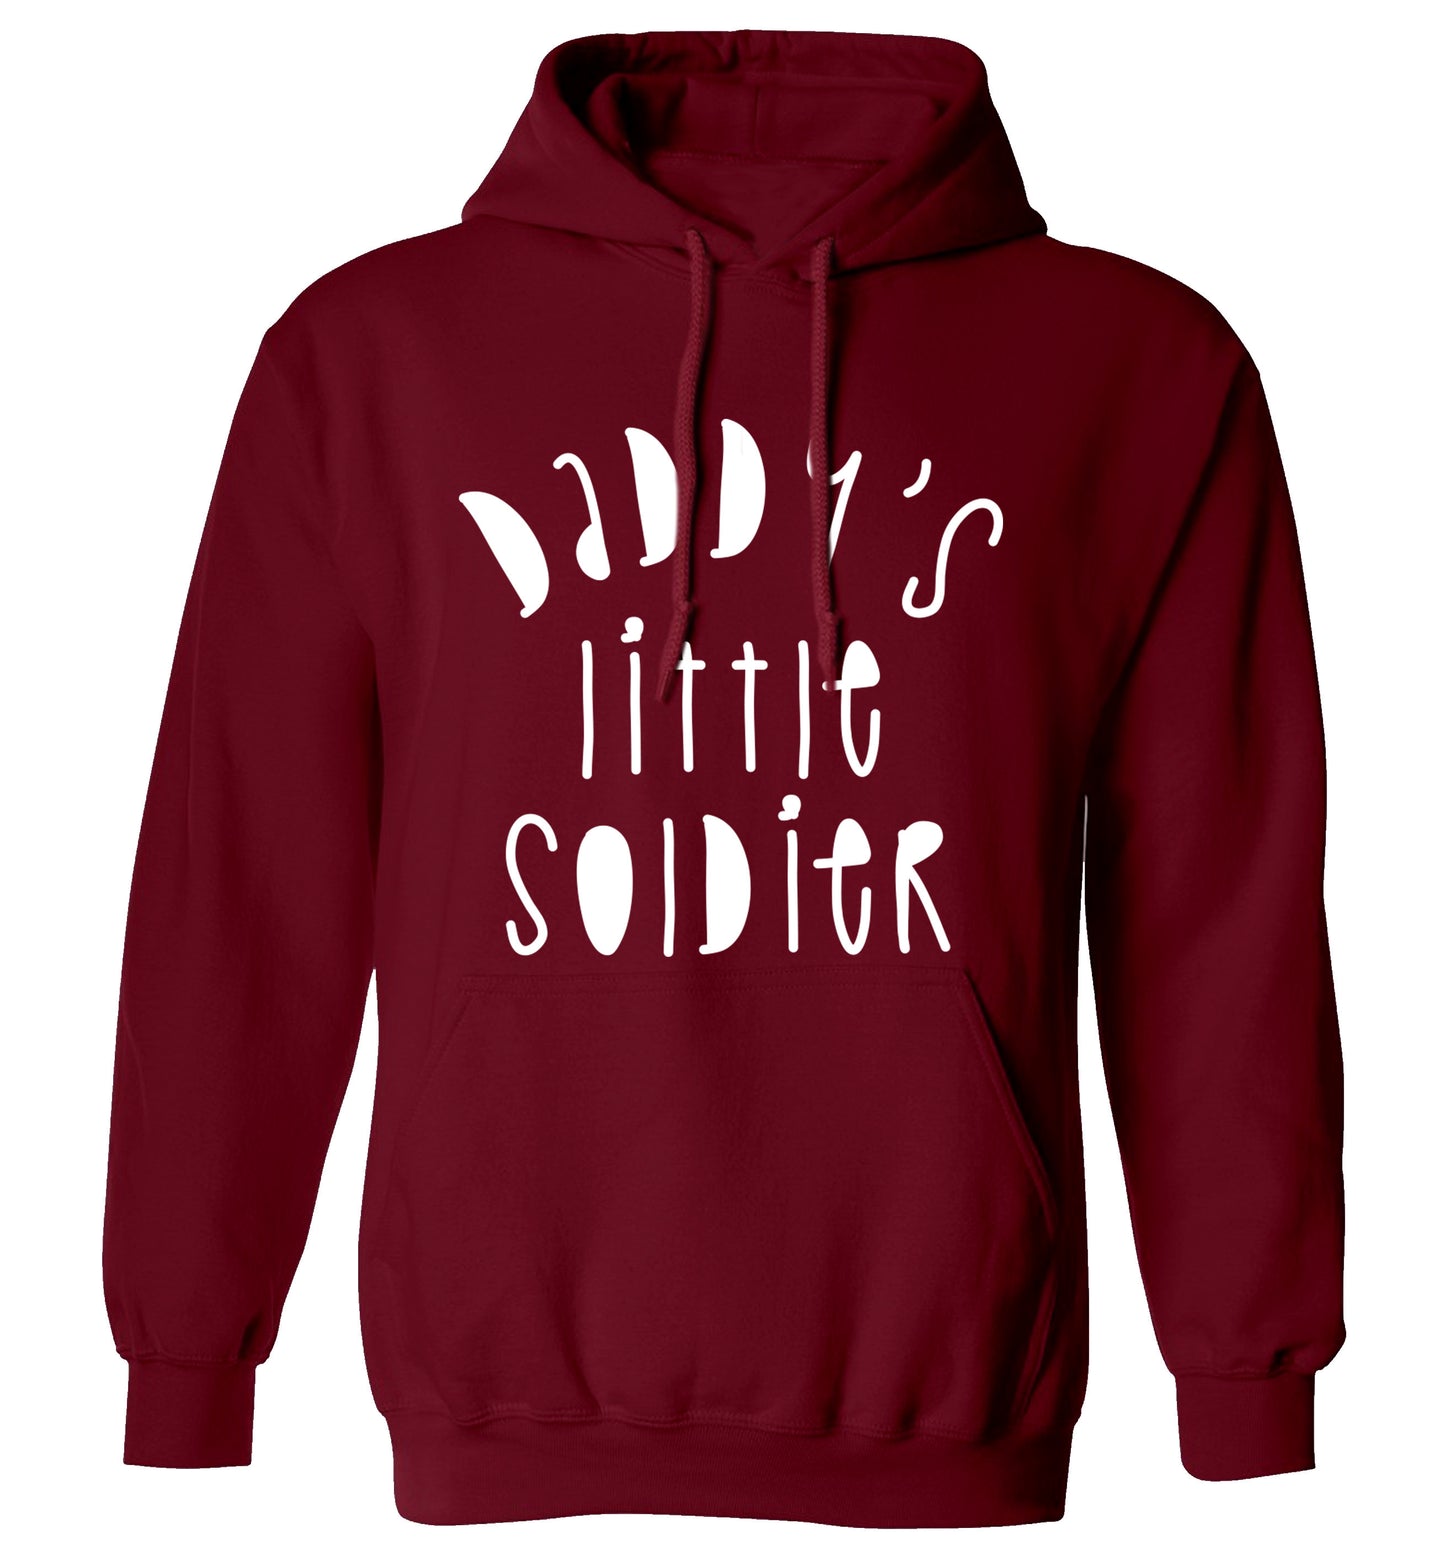 Daddy's little soldier adults unisex maroon hoodie 2XL